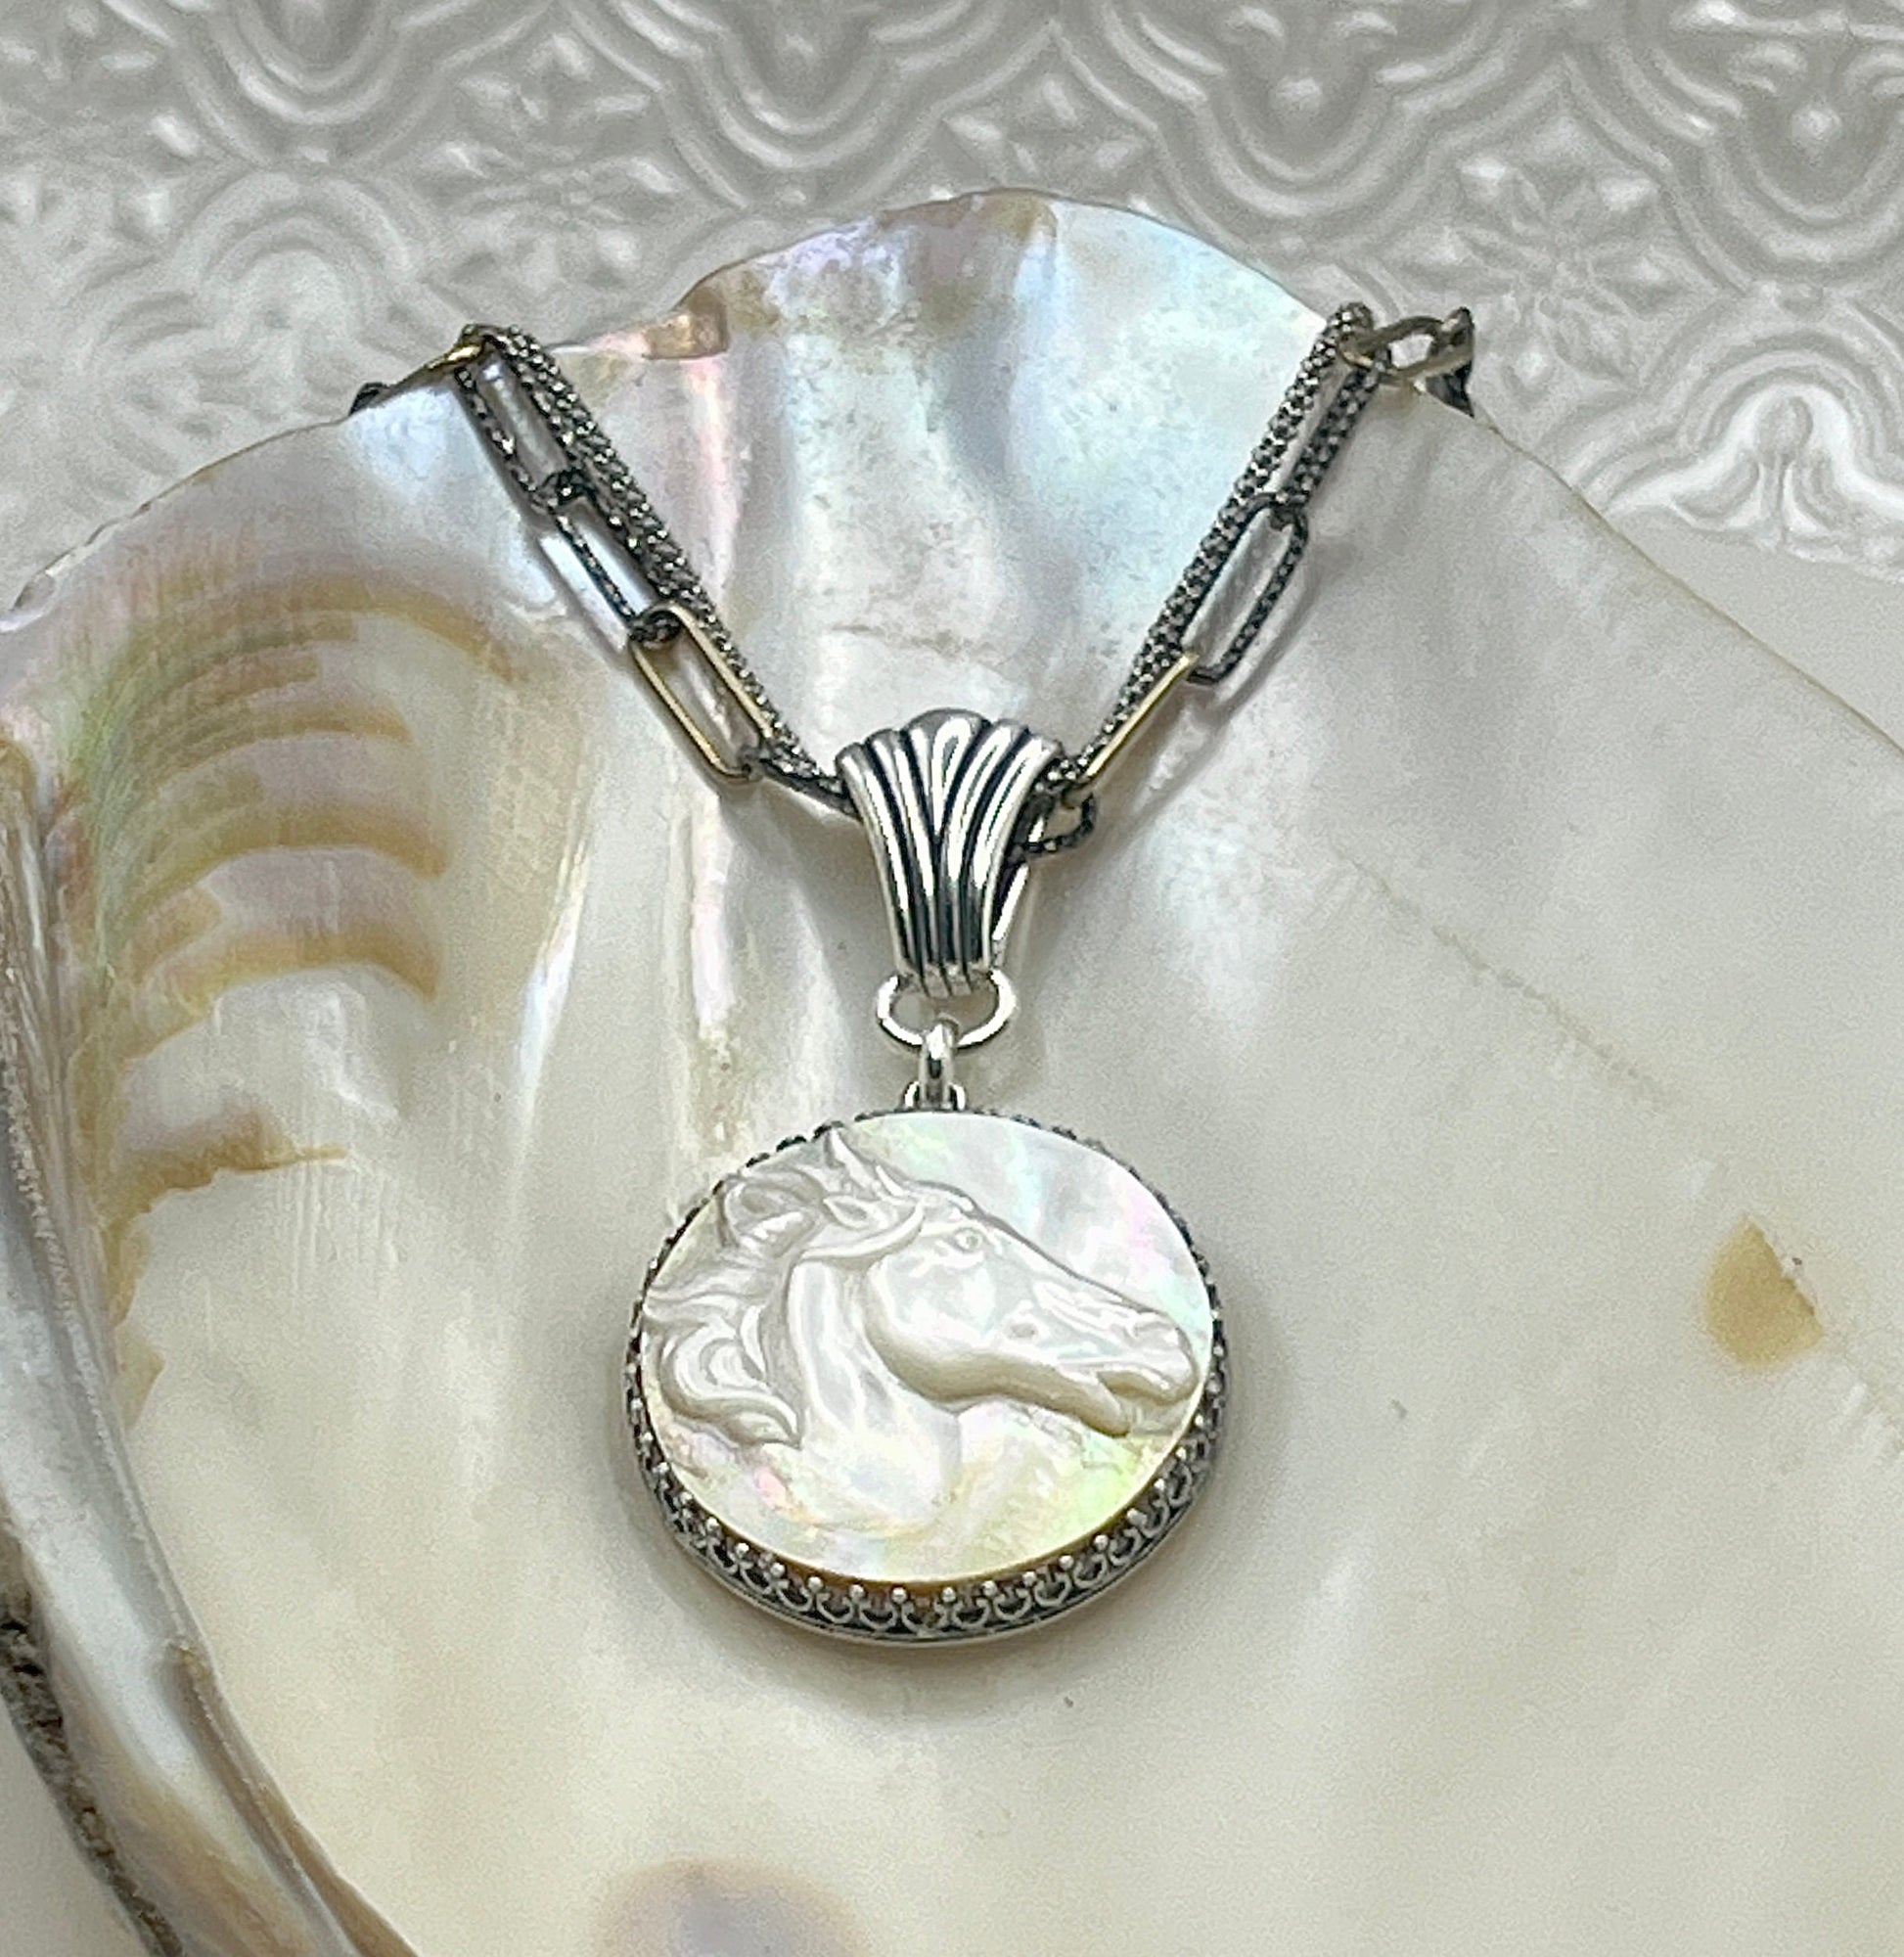 Vintage Horse Cameo Necklace, Horse Jewelry, Mother of Pearl Shell, Equestrian Jewelry, Unique Equine Gifts for Women, Elegant Cameo